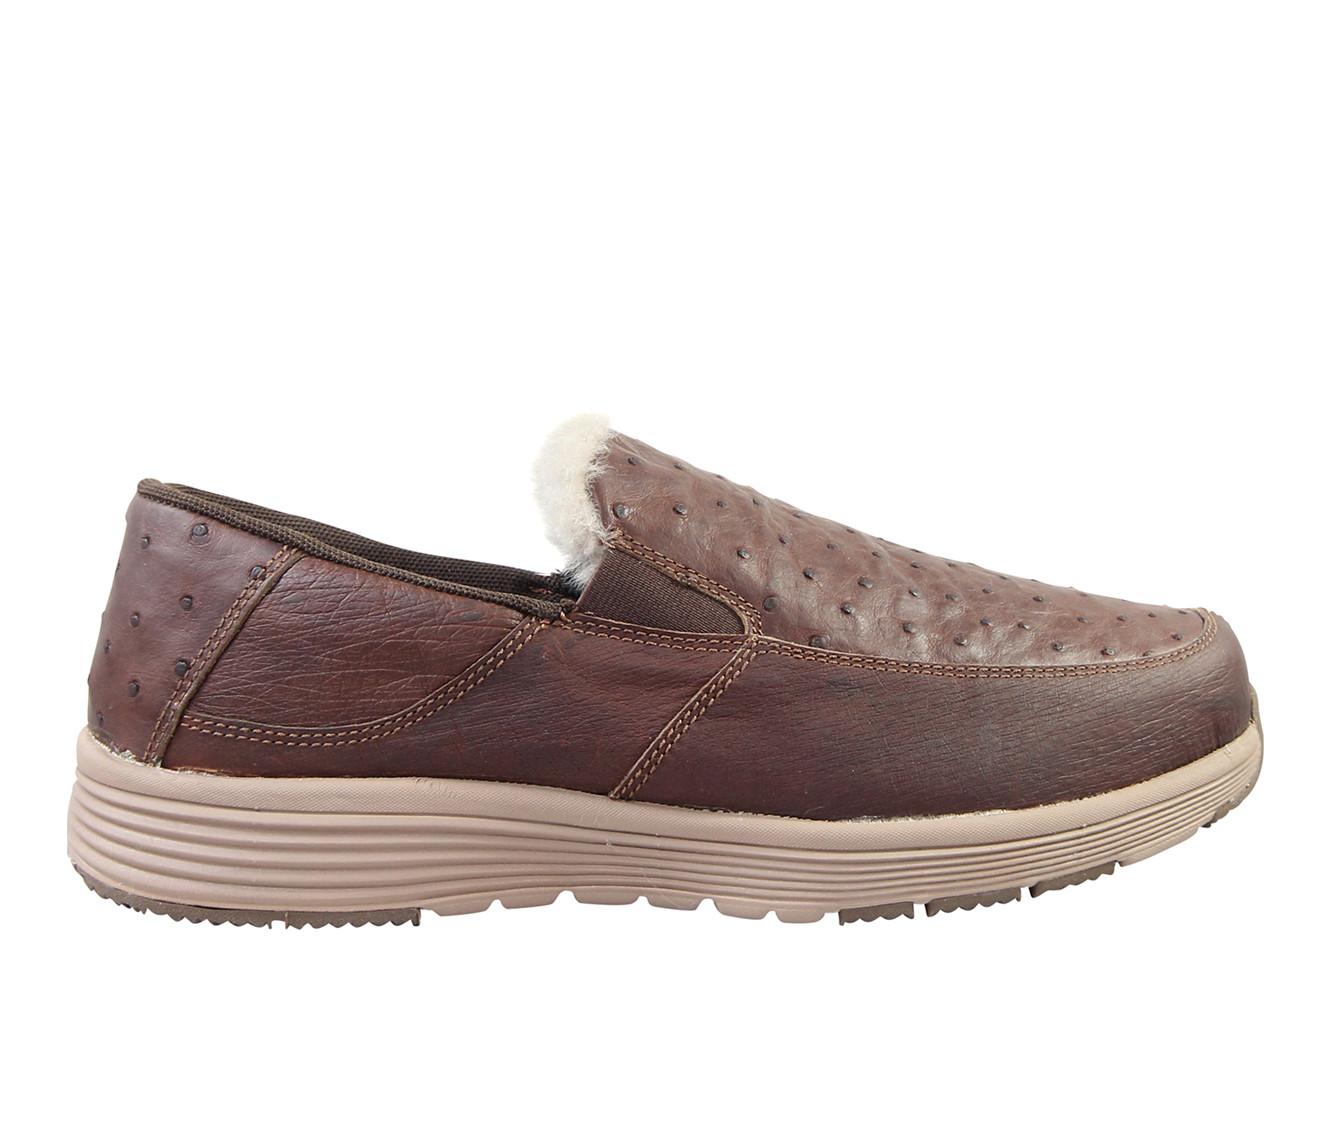 Superlamb Bulgan Ostrich Extended Sizes Casual Loafers